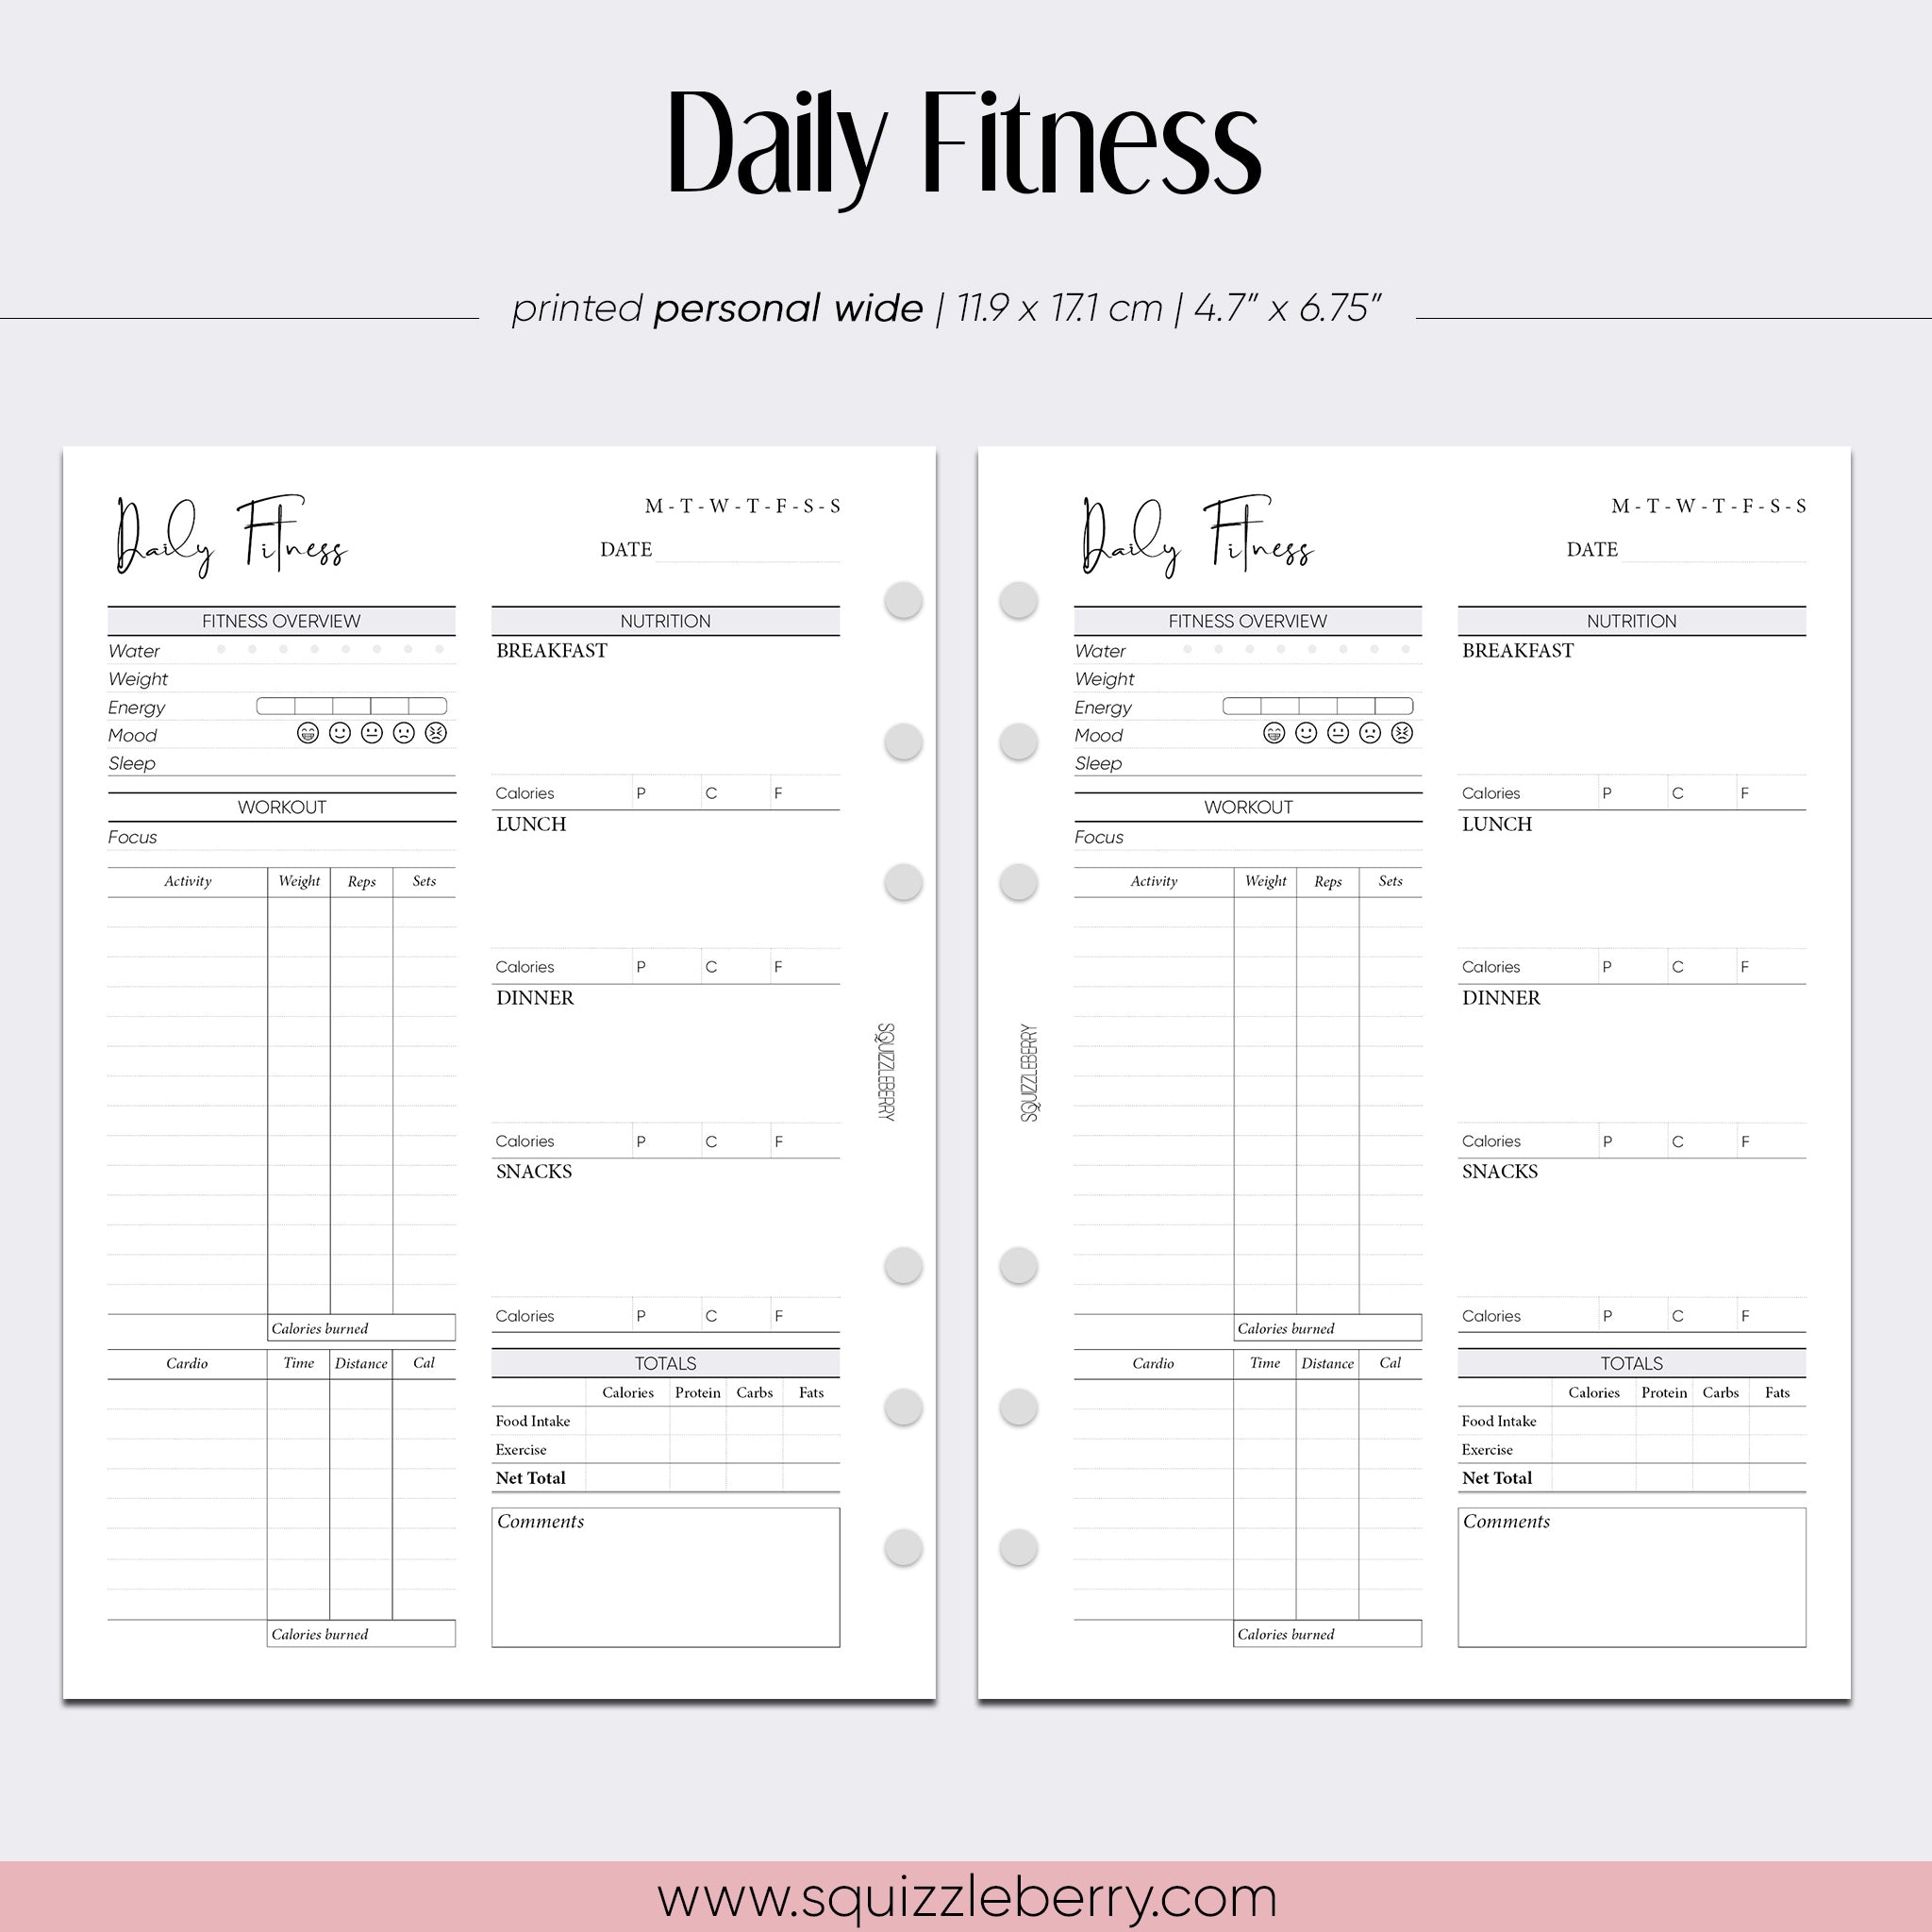 daily nutrition with macros and workout log personal wide planner